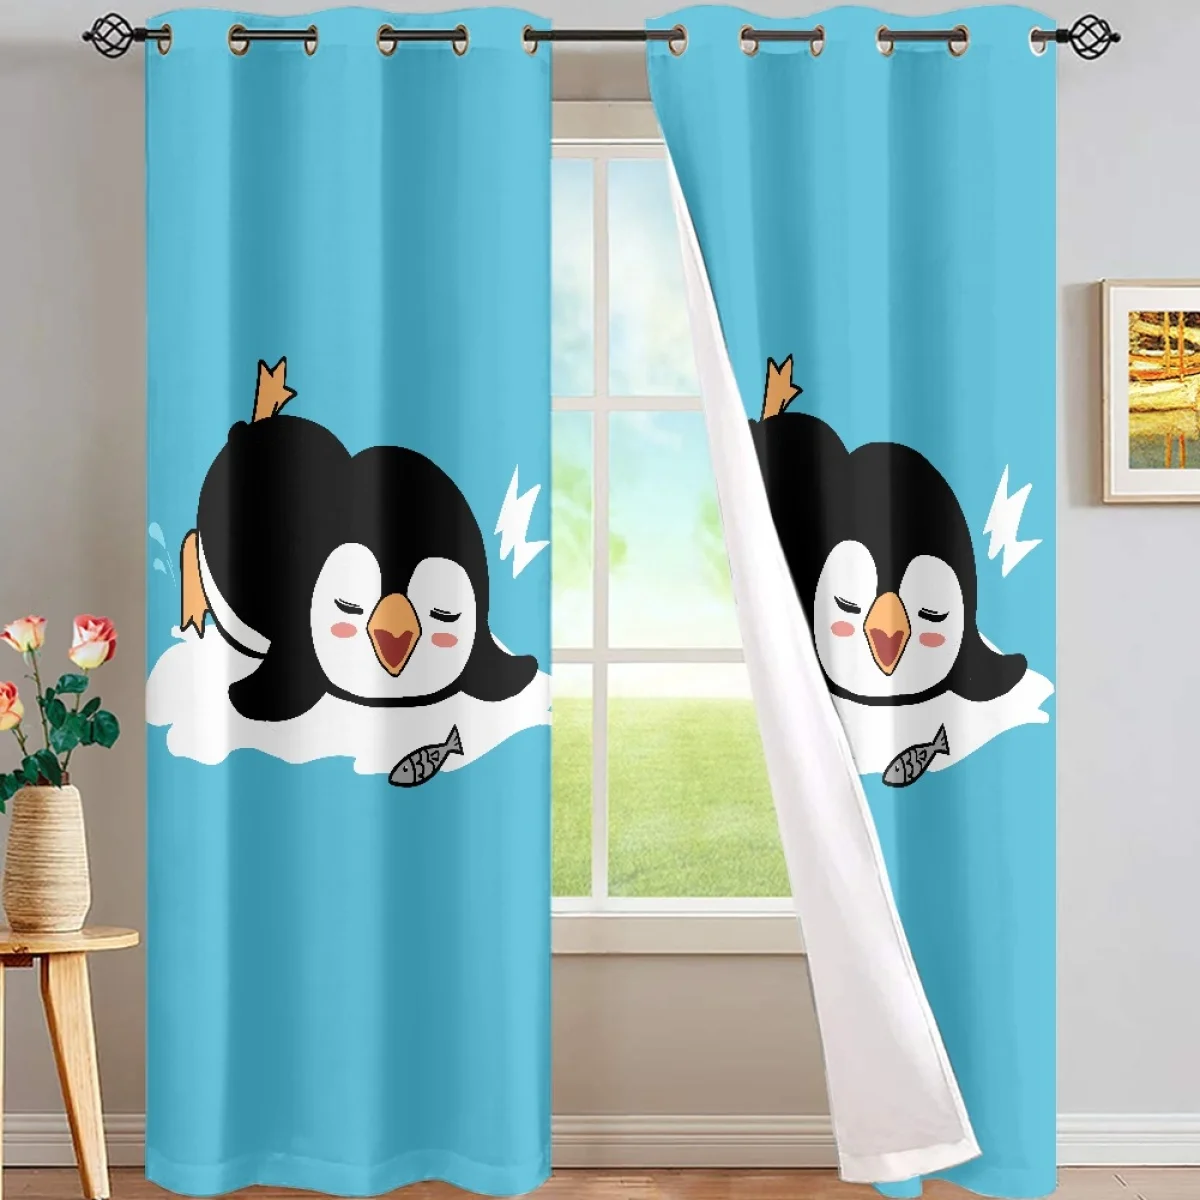 

High Quality Polyester Fabric Penguin Curtains Hand Fully Shaded For Boy Girl Bathroom Bedroom Living Room Cartoon Decor Drapes